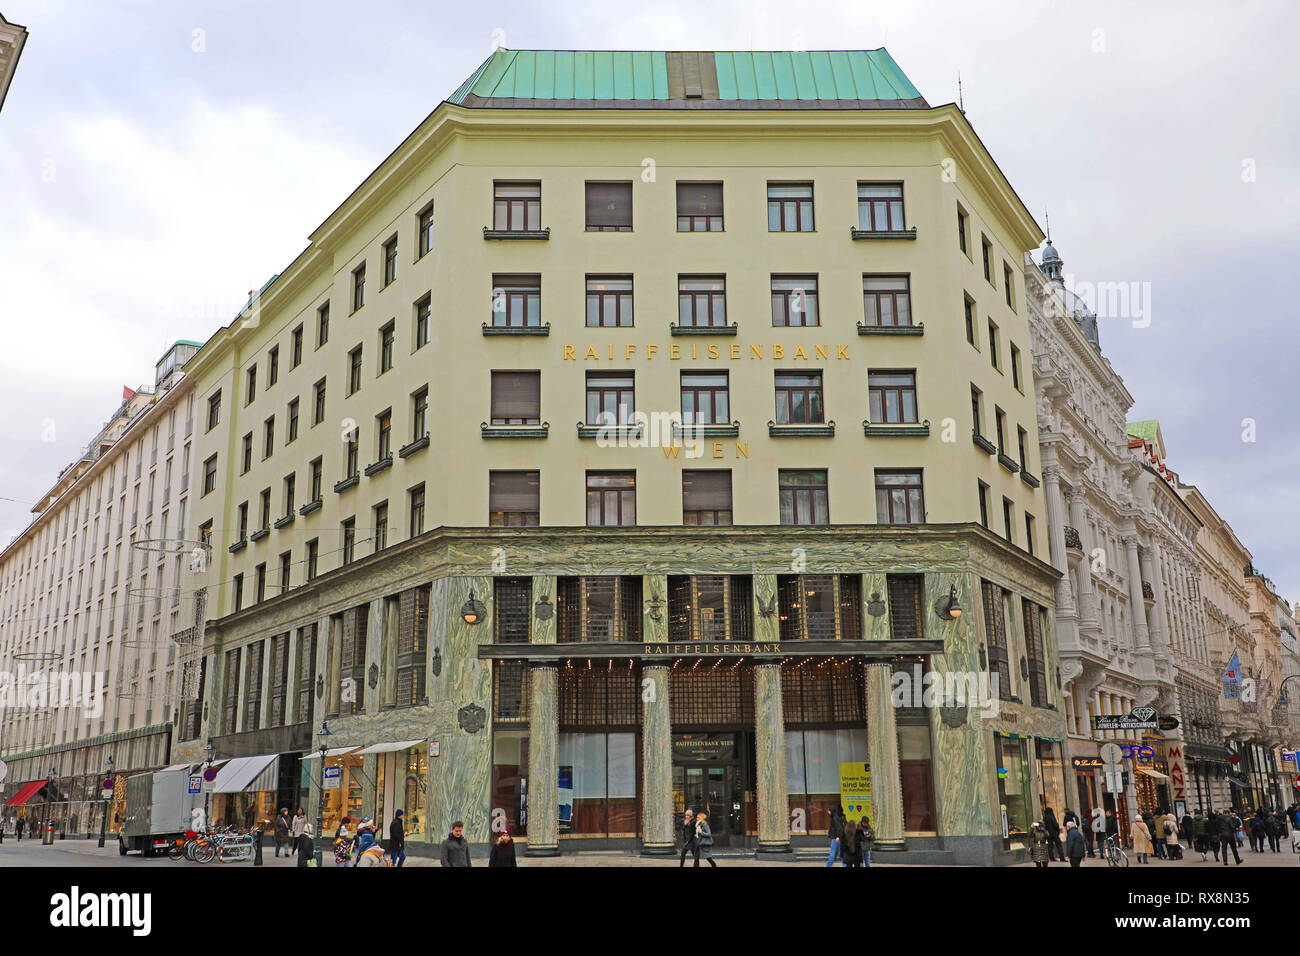 VIENNA, AUSTRIA - JANUARY 8, 2019: Facade of the Looshaus, designed by architect Adolf Loos, in Vienna, now housing a branch of the Raiffeisen Bank Stock Photo